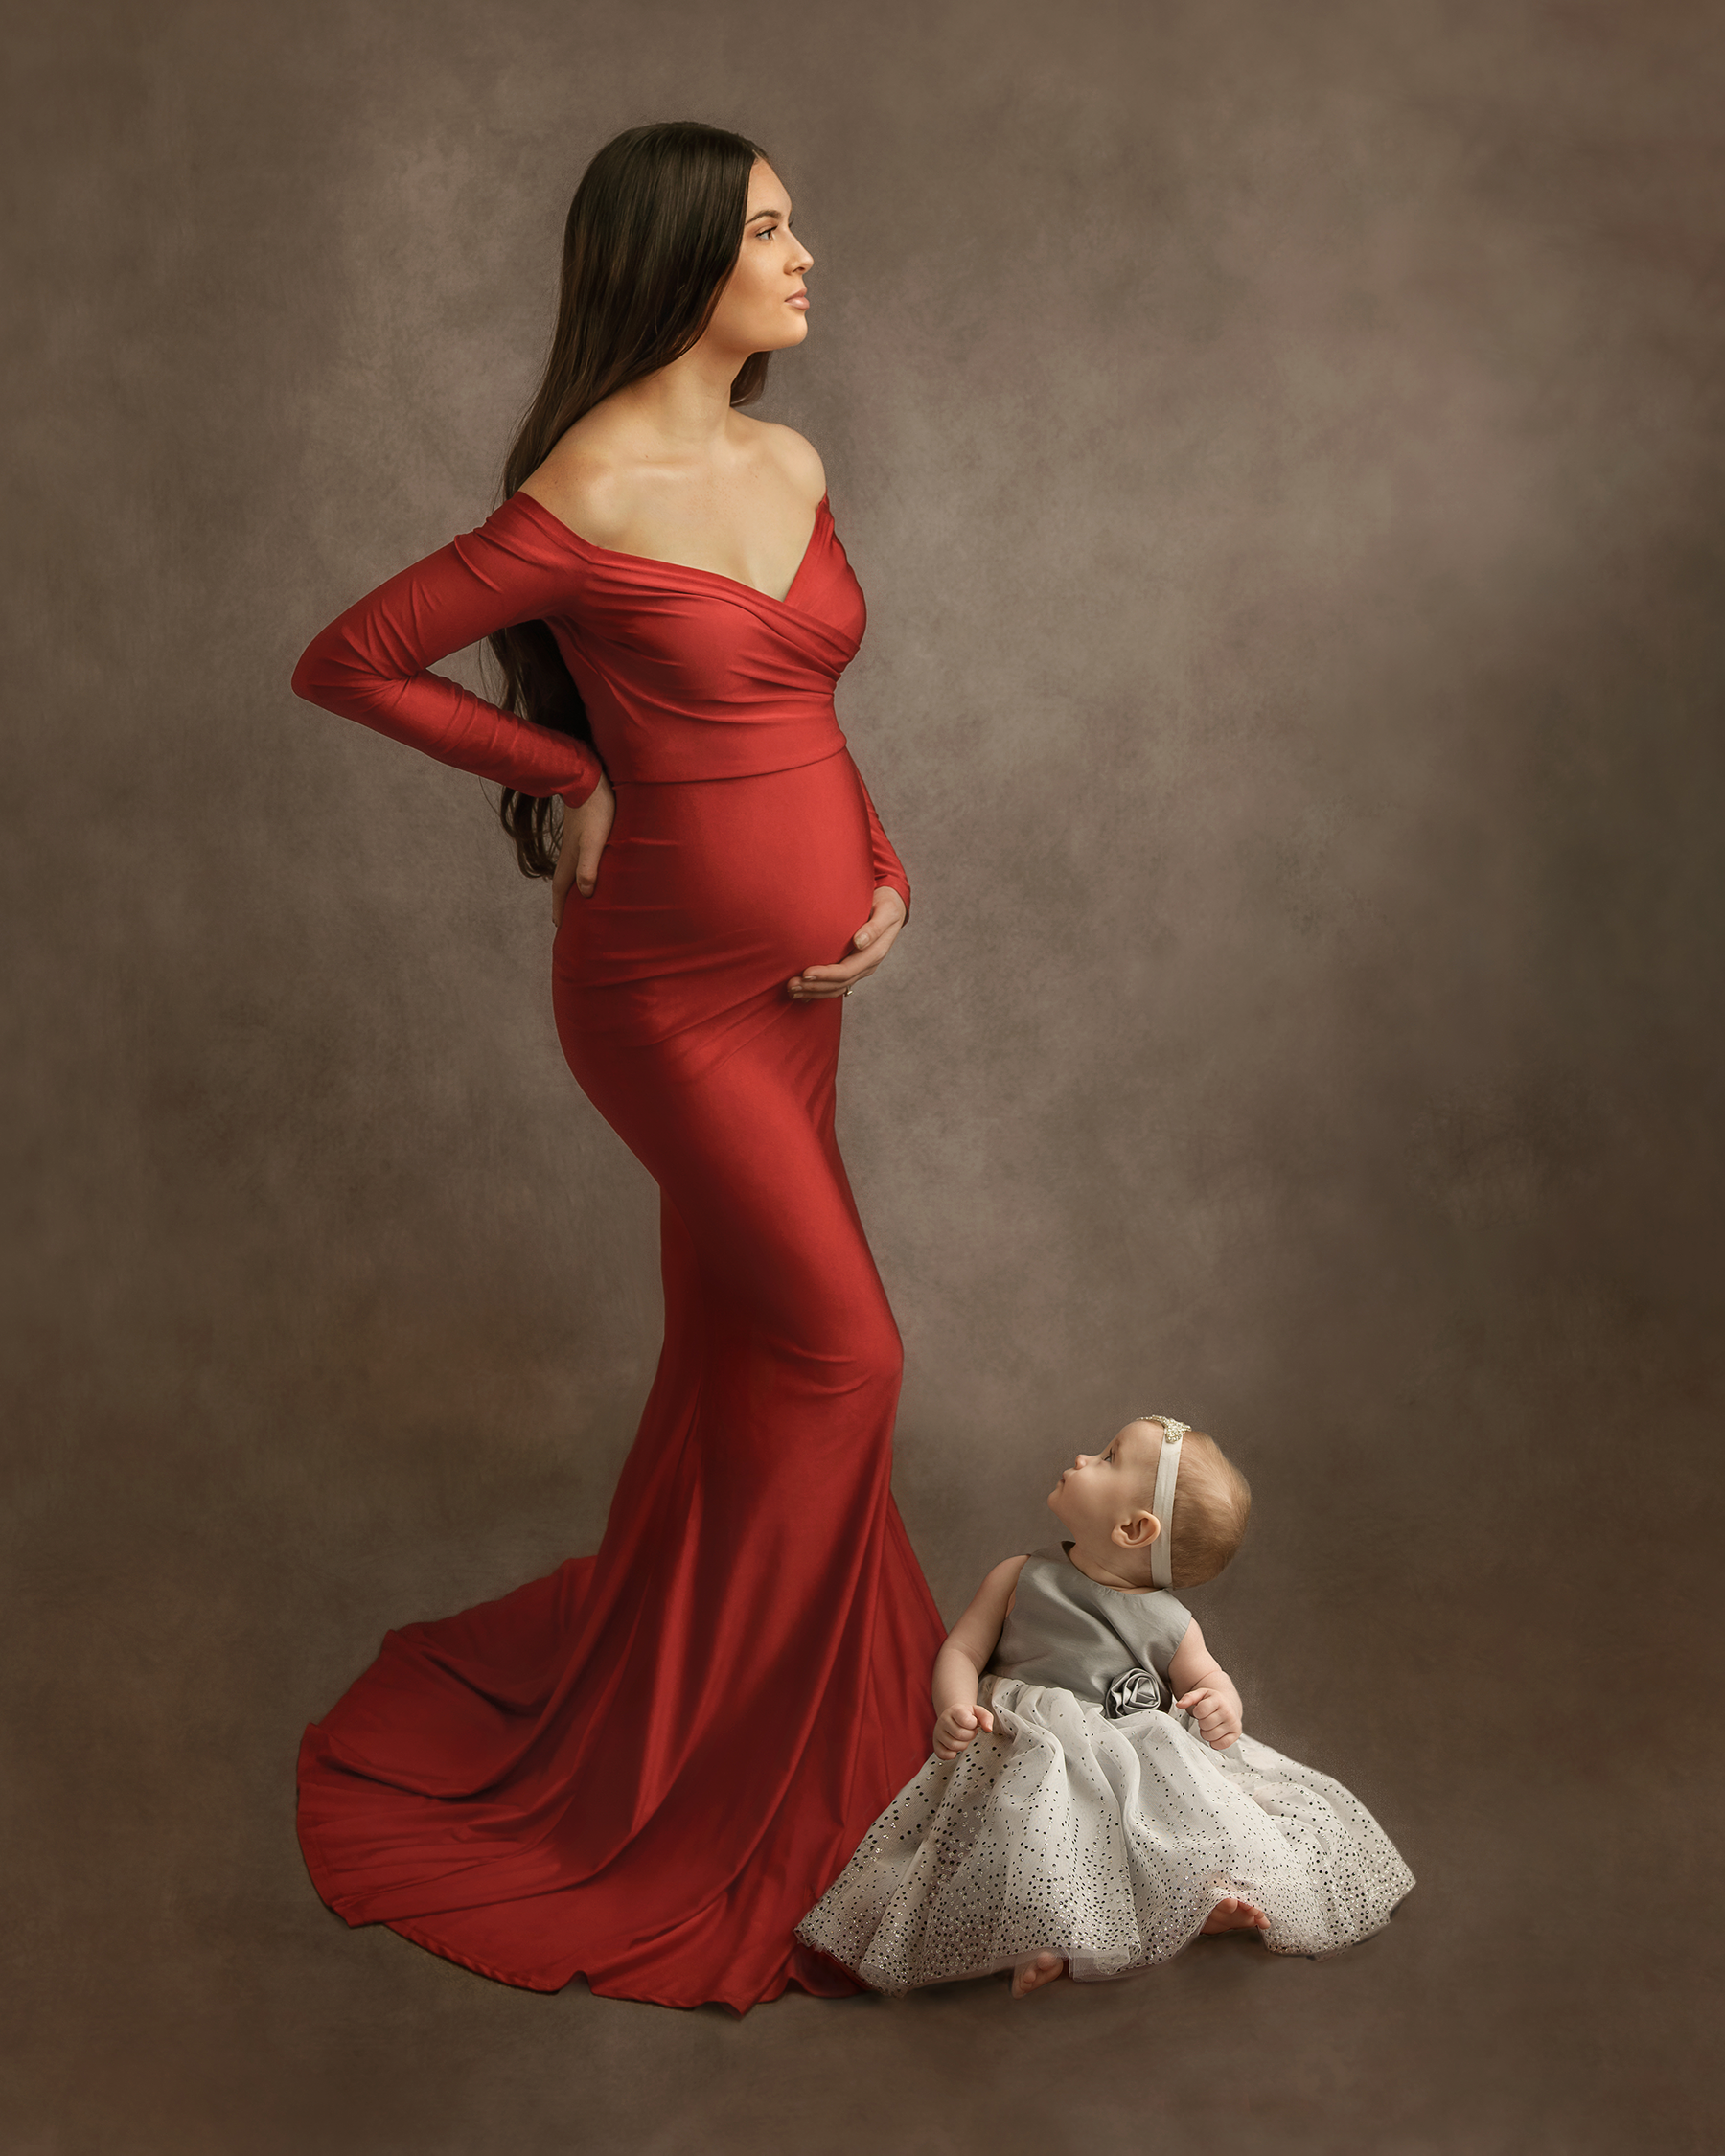 Pregnant-Momma-and-toddler studio portrait session with sherry pratt photography in columbia california.